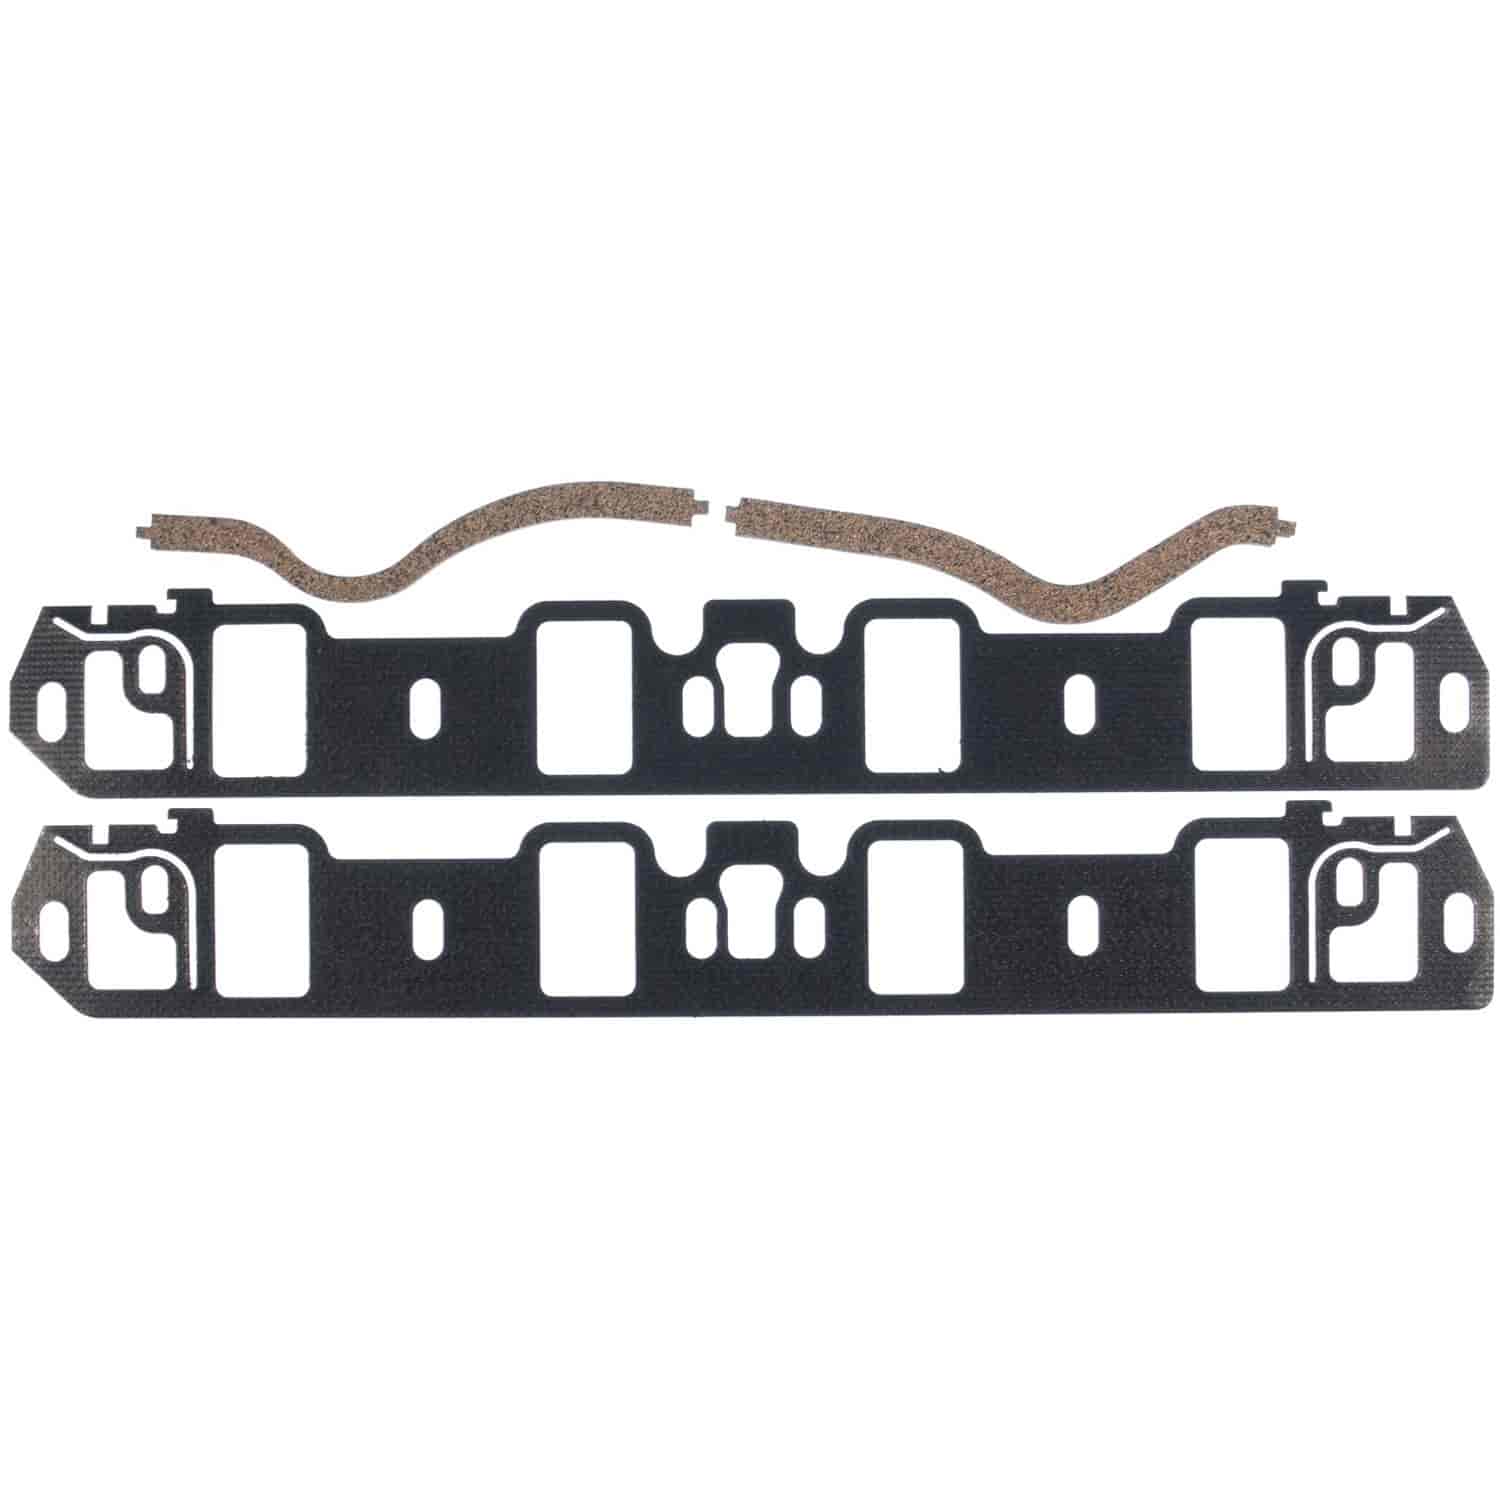 Intake Manifold Set Ford-Pass Merc 351W 69-74 int Material=Victocor 159B-AM w/Victocor 947